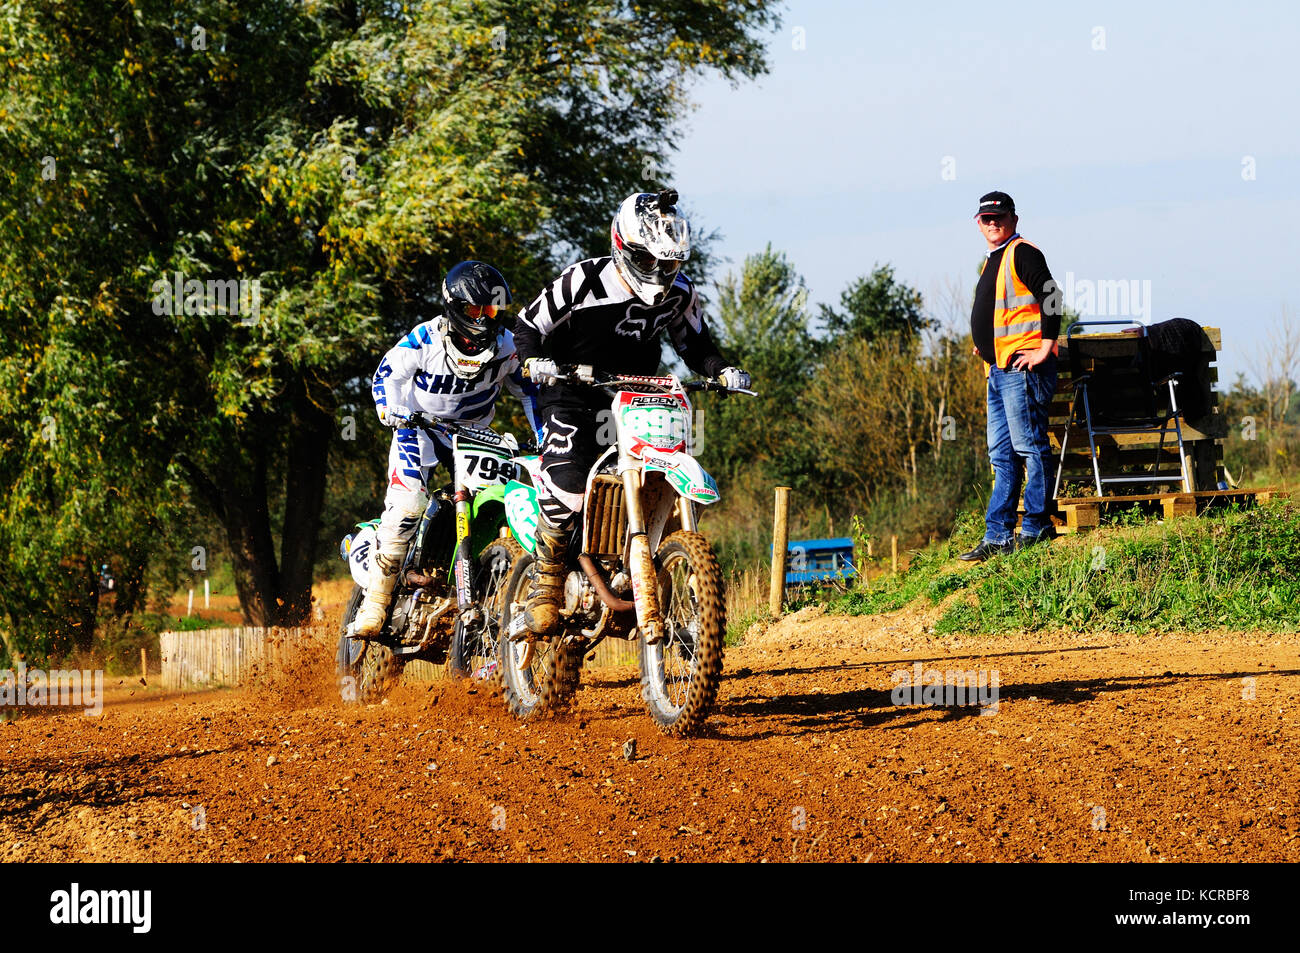 practice session at motocross track Stock Photo